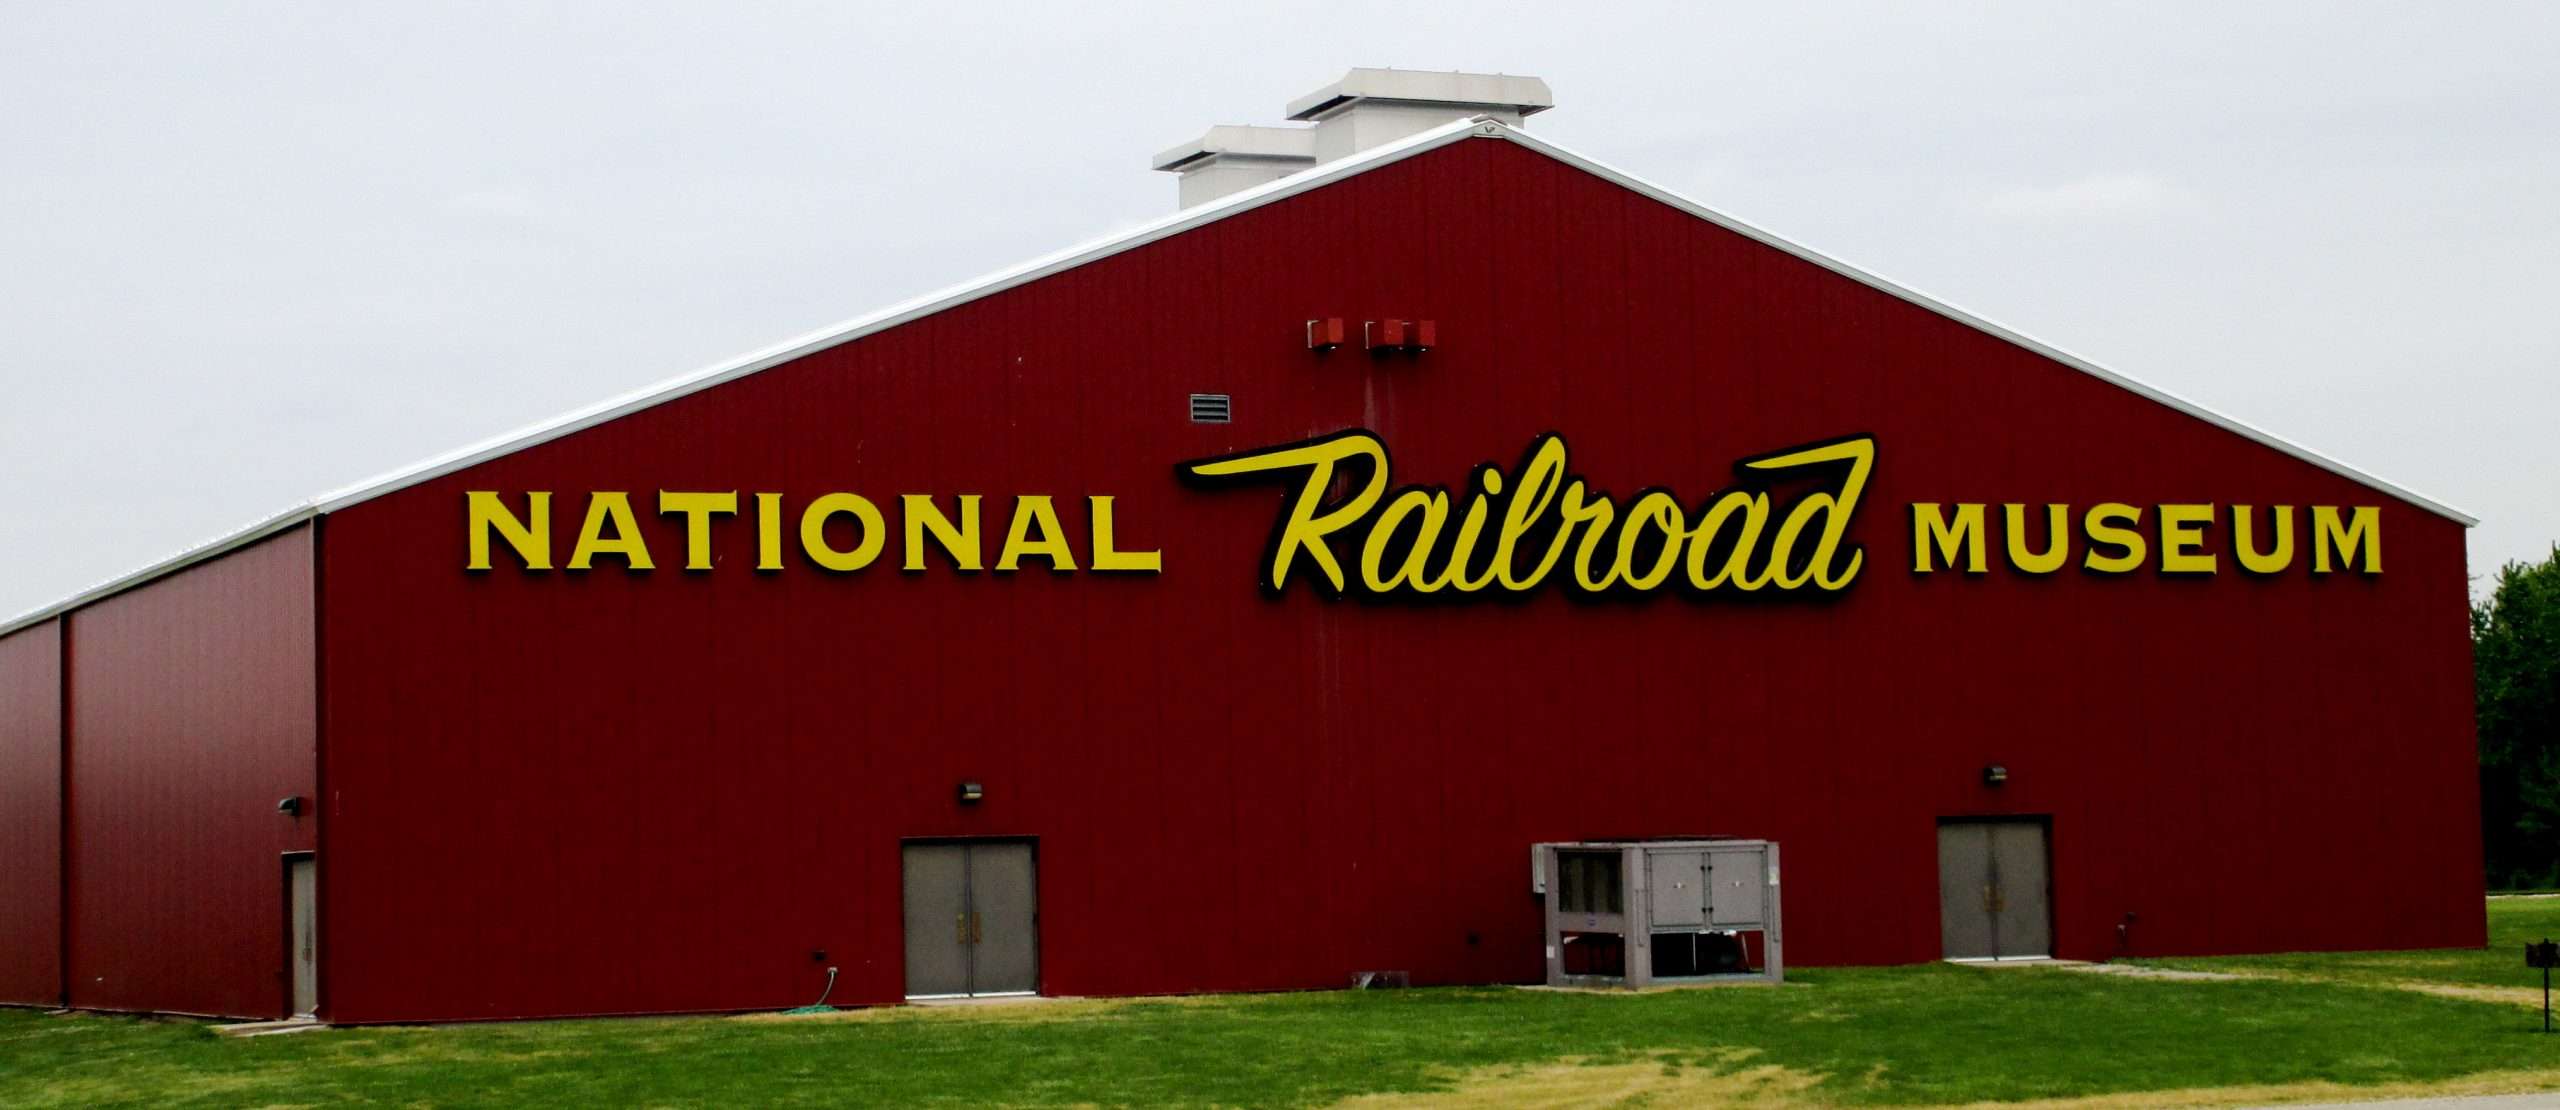 Something About Trains: The National Railroad Museum, Green Bay, WI ...